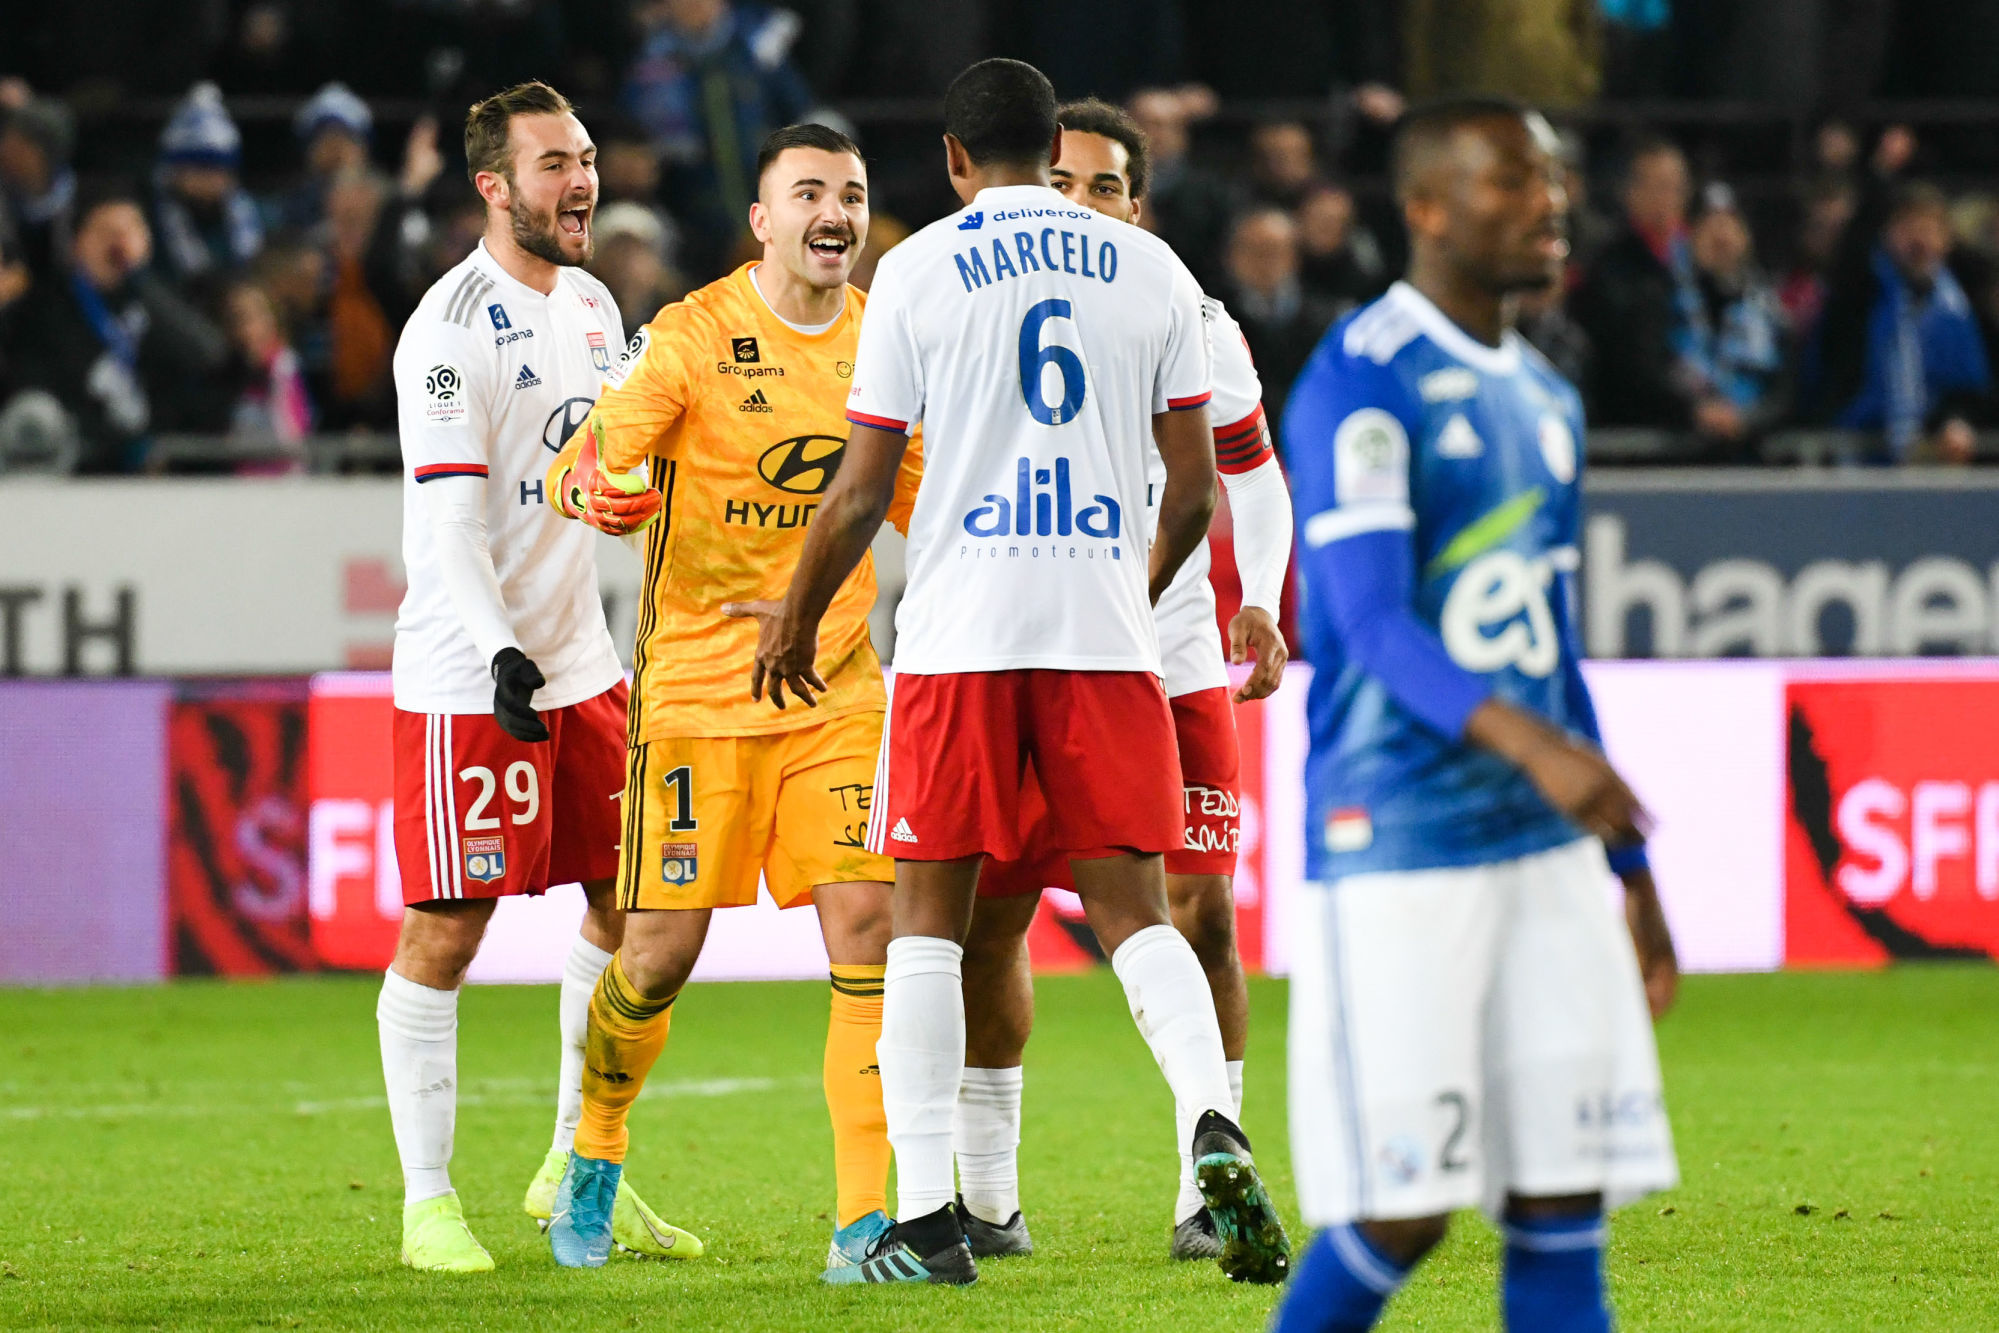 Lucas TOUSART of Lyon, Anthony LOPES of Lyon andMARCELO of Lyon during the Ligue 1 match between Strasbourg and Lyon at Stade de la Meinau on November 30, 2019 in Strasbourg, France. (Photo by Sebastien Bozon/Icon Sport) - Lucas TOUSART - Anthony LOPES - Marcelo GUEDES FILHO - Stade de la Meinau - Strasbourg (France)